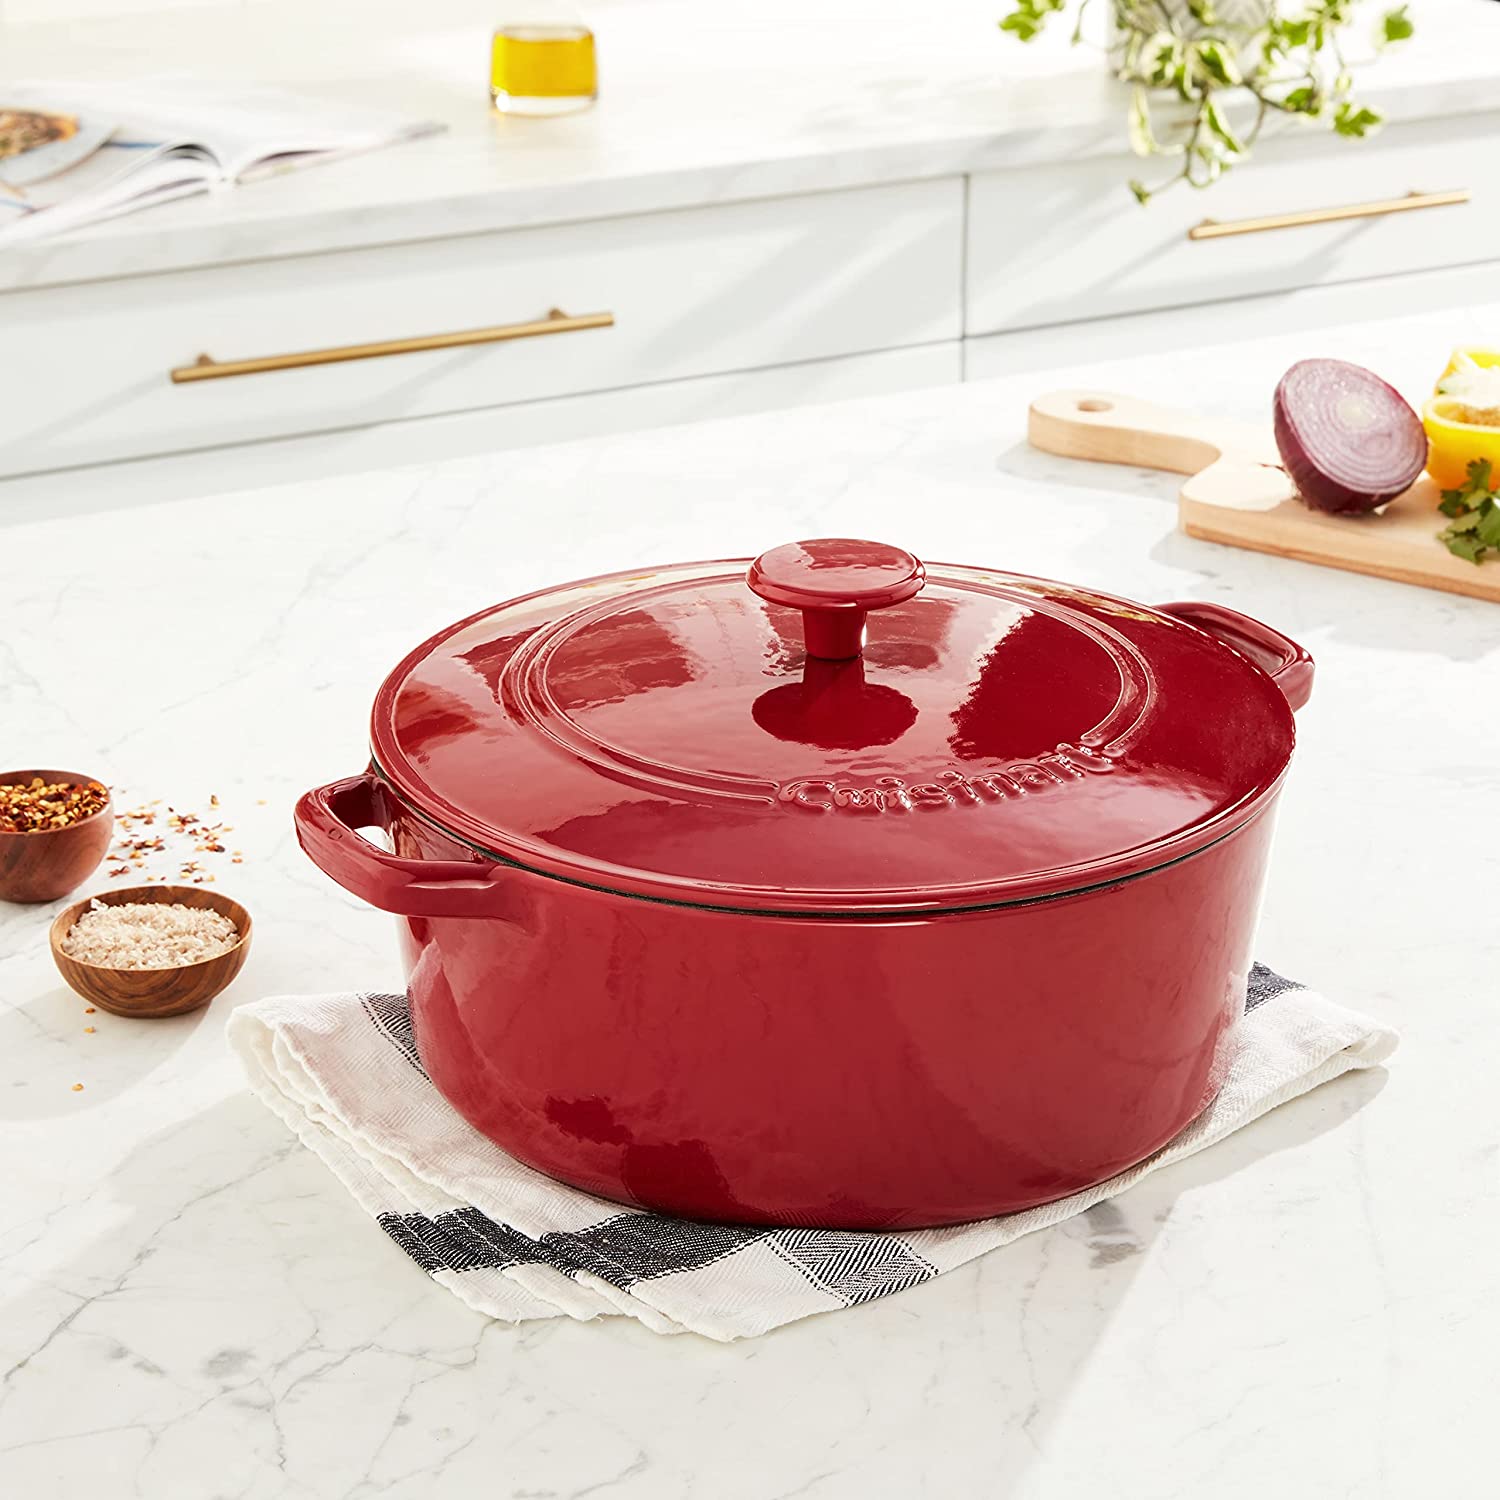 Cuisinart CI670-30RDM Chef's Classic Enameled Cast Iron 7-Quart Round Covered Casserole, Cardinal Red